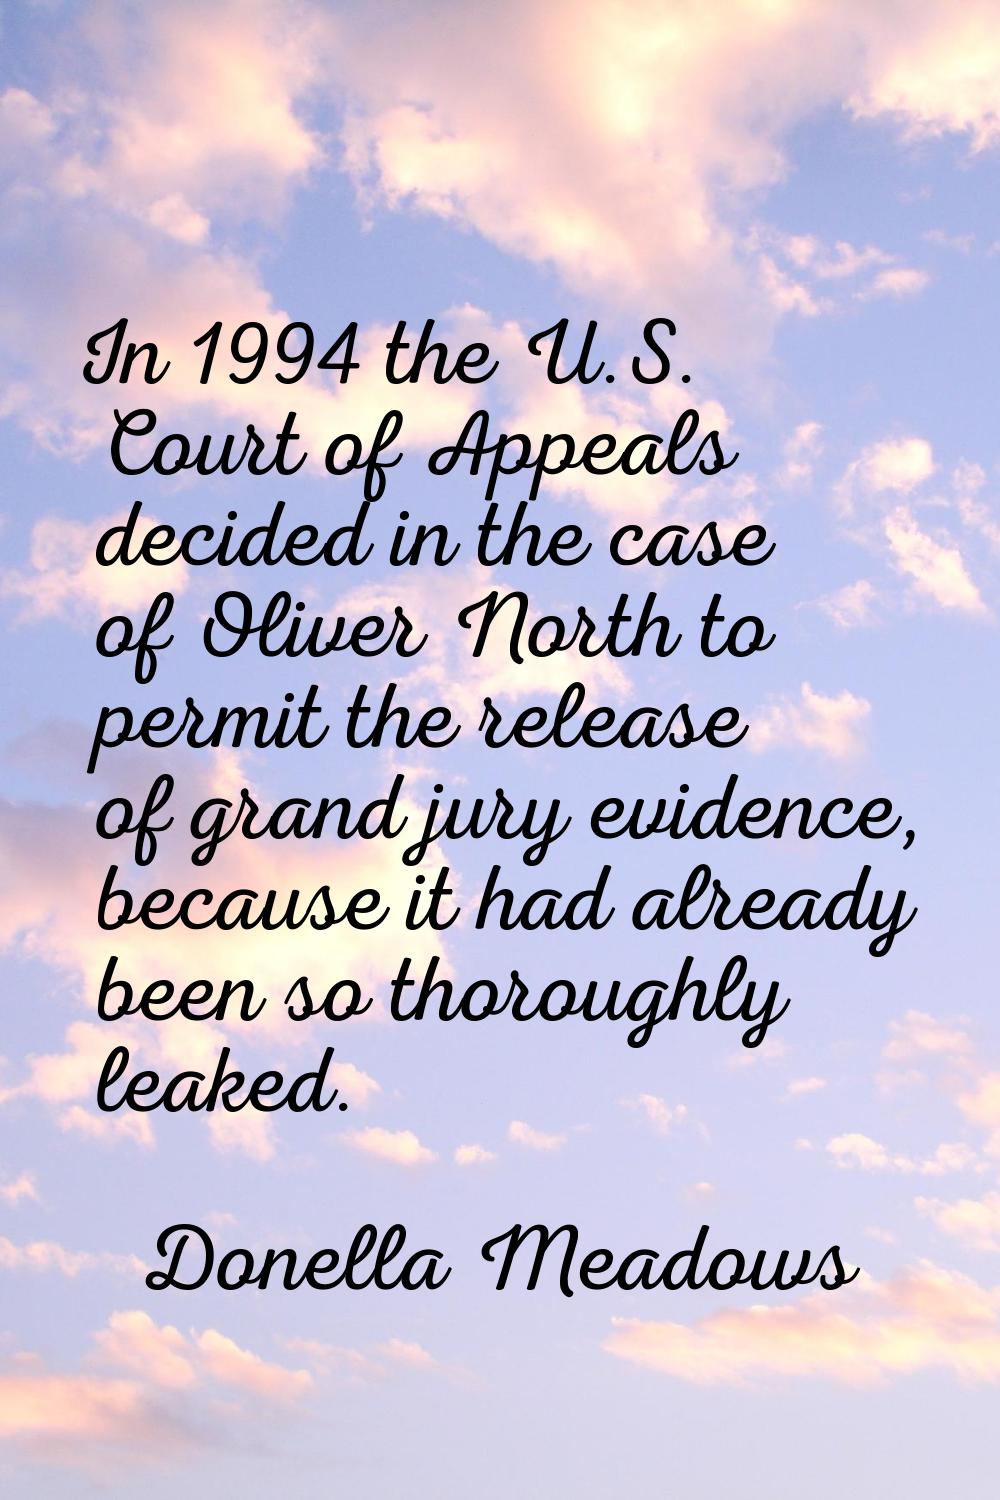 In 1994 the U.S. Court of Appeals decided in the case of Oliver North to permit the release of gran